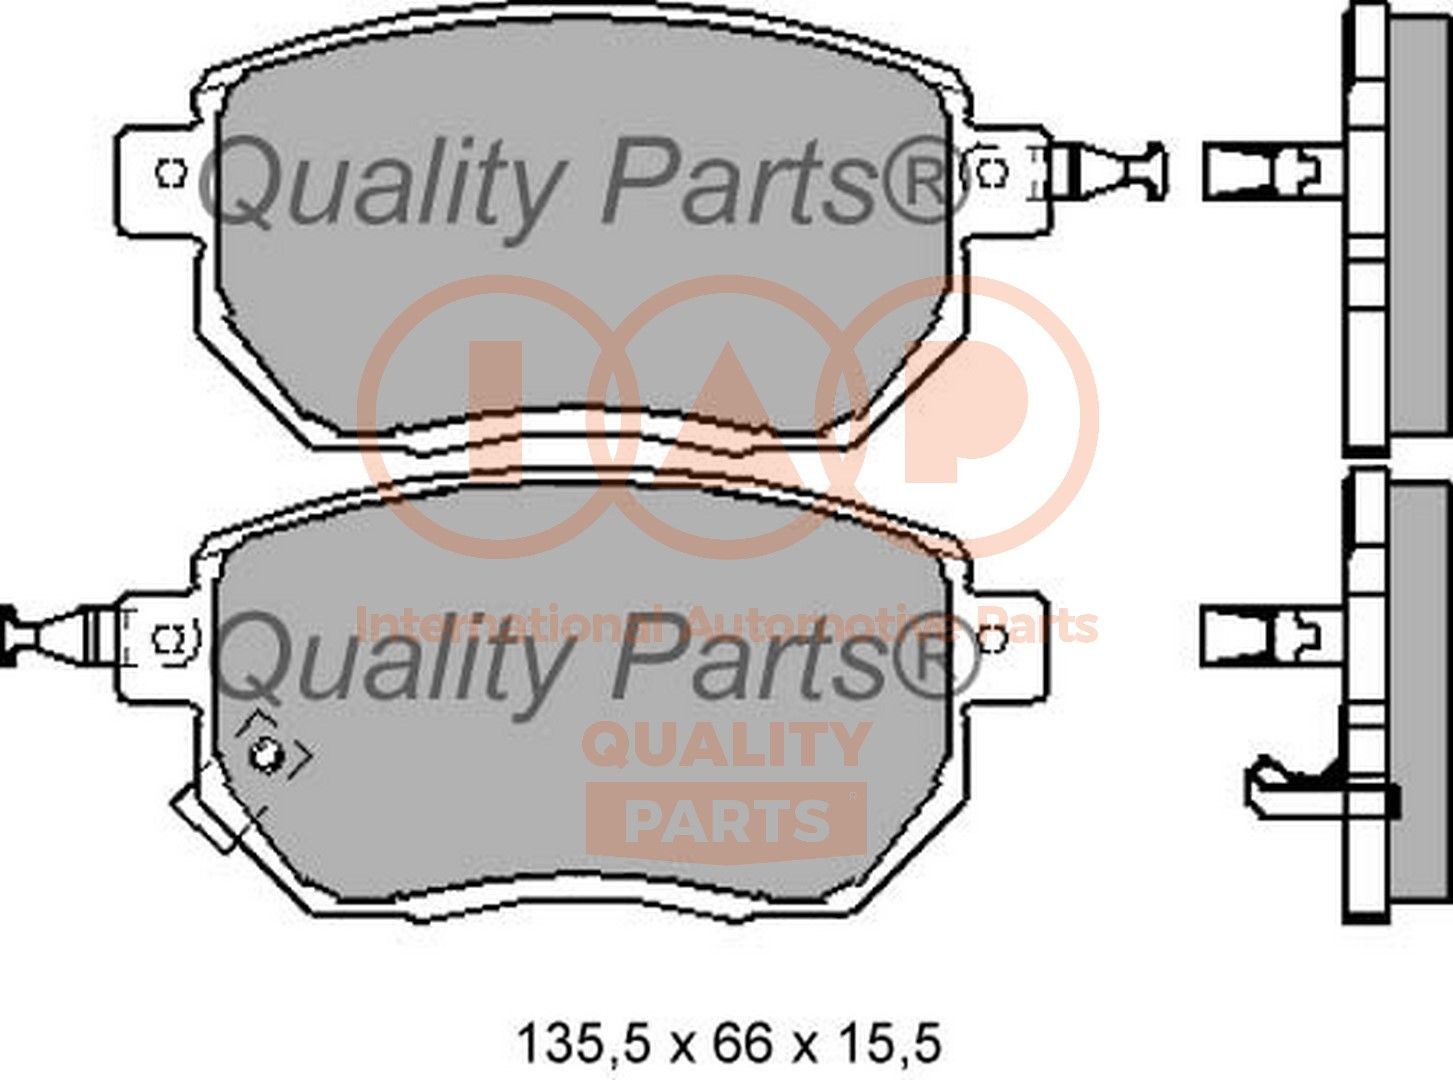 IAP QUALITY PARTS Front Axle Height 1: 66mm, Width 1: 135,5mm, Thickness 1: 15,5mm Brake pads 704-13120 buy